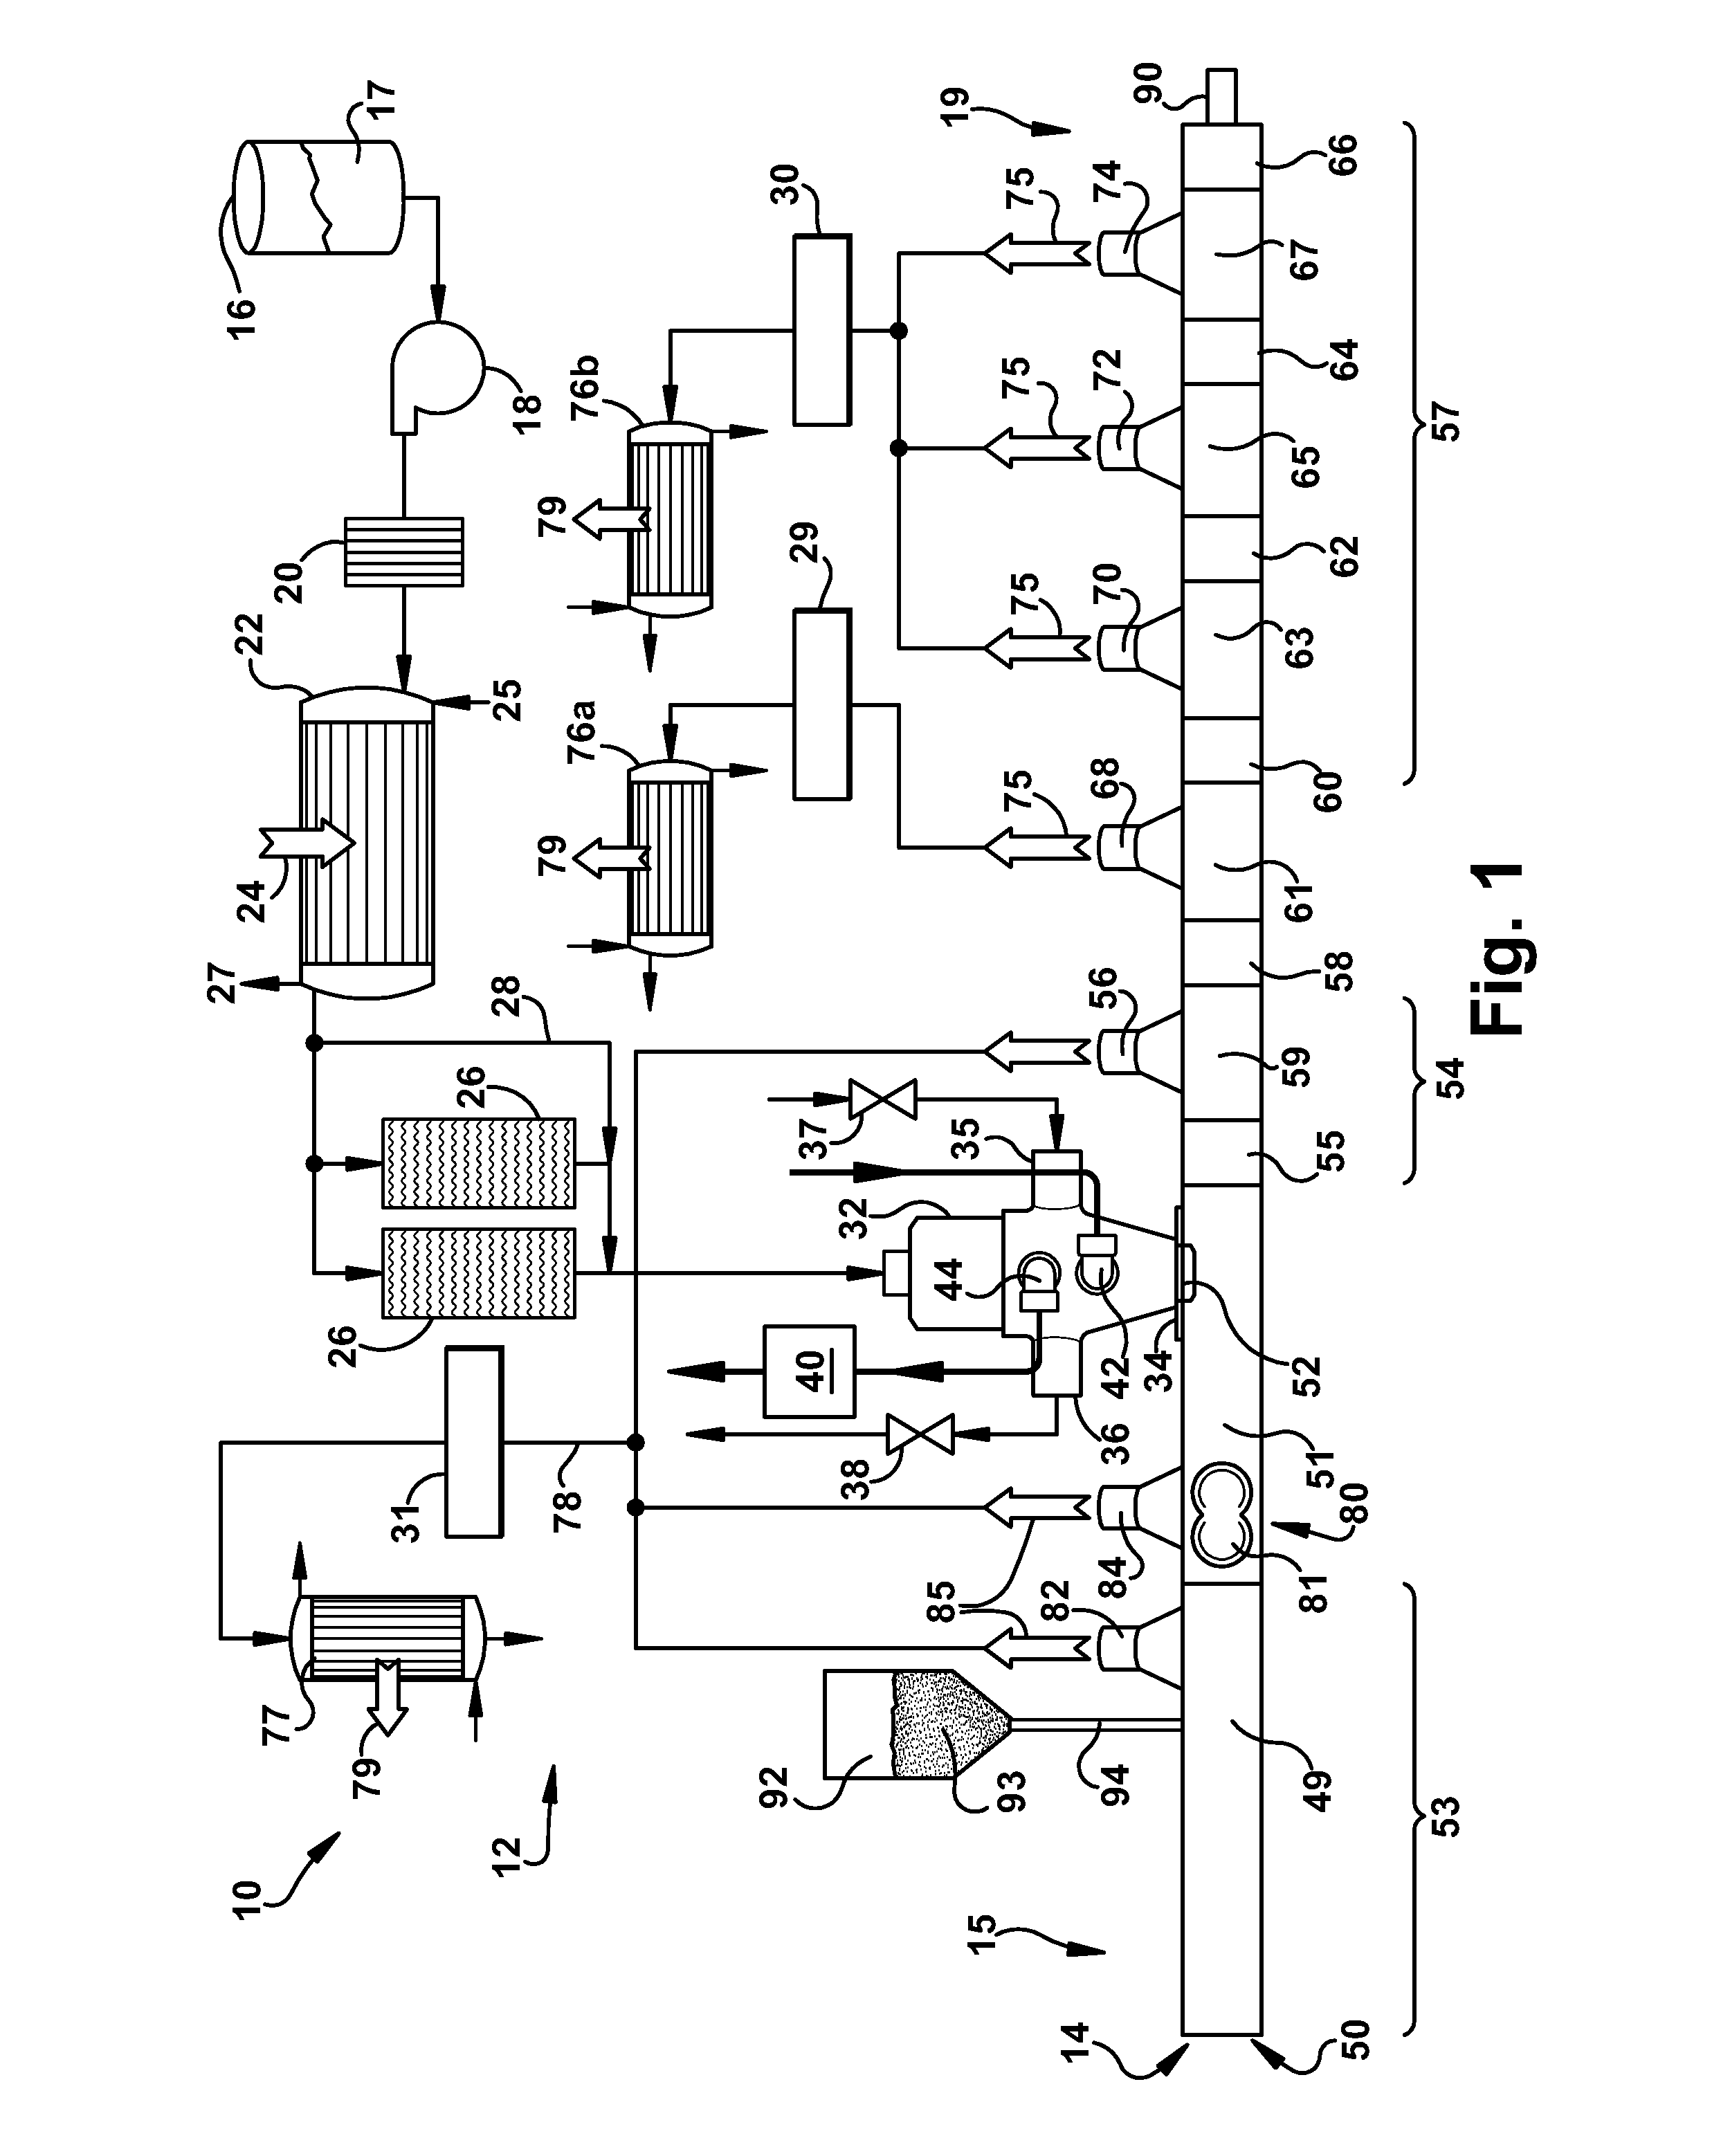 Apparatus and method of separating a polymer from a solvent